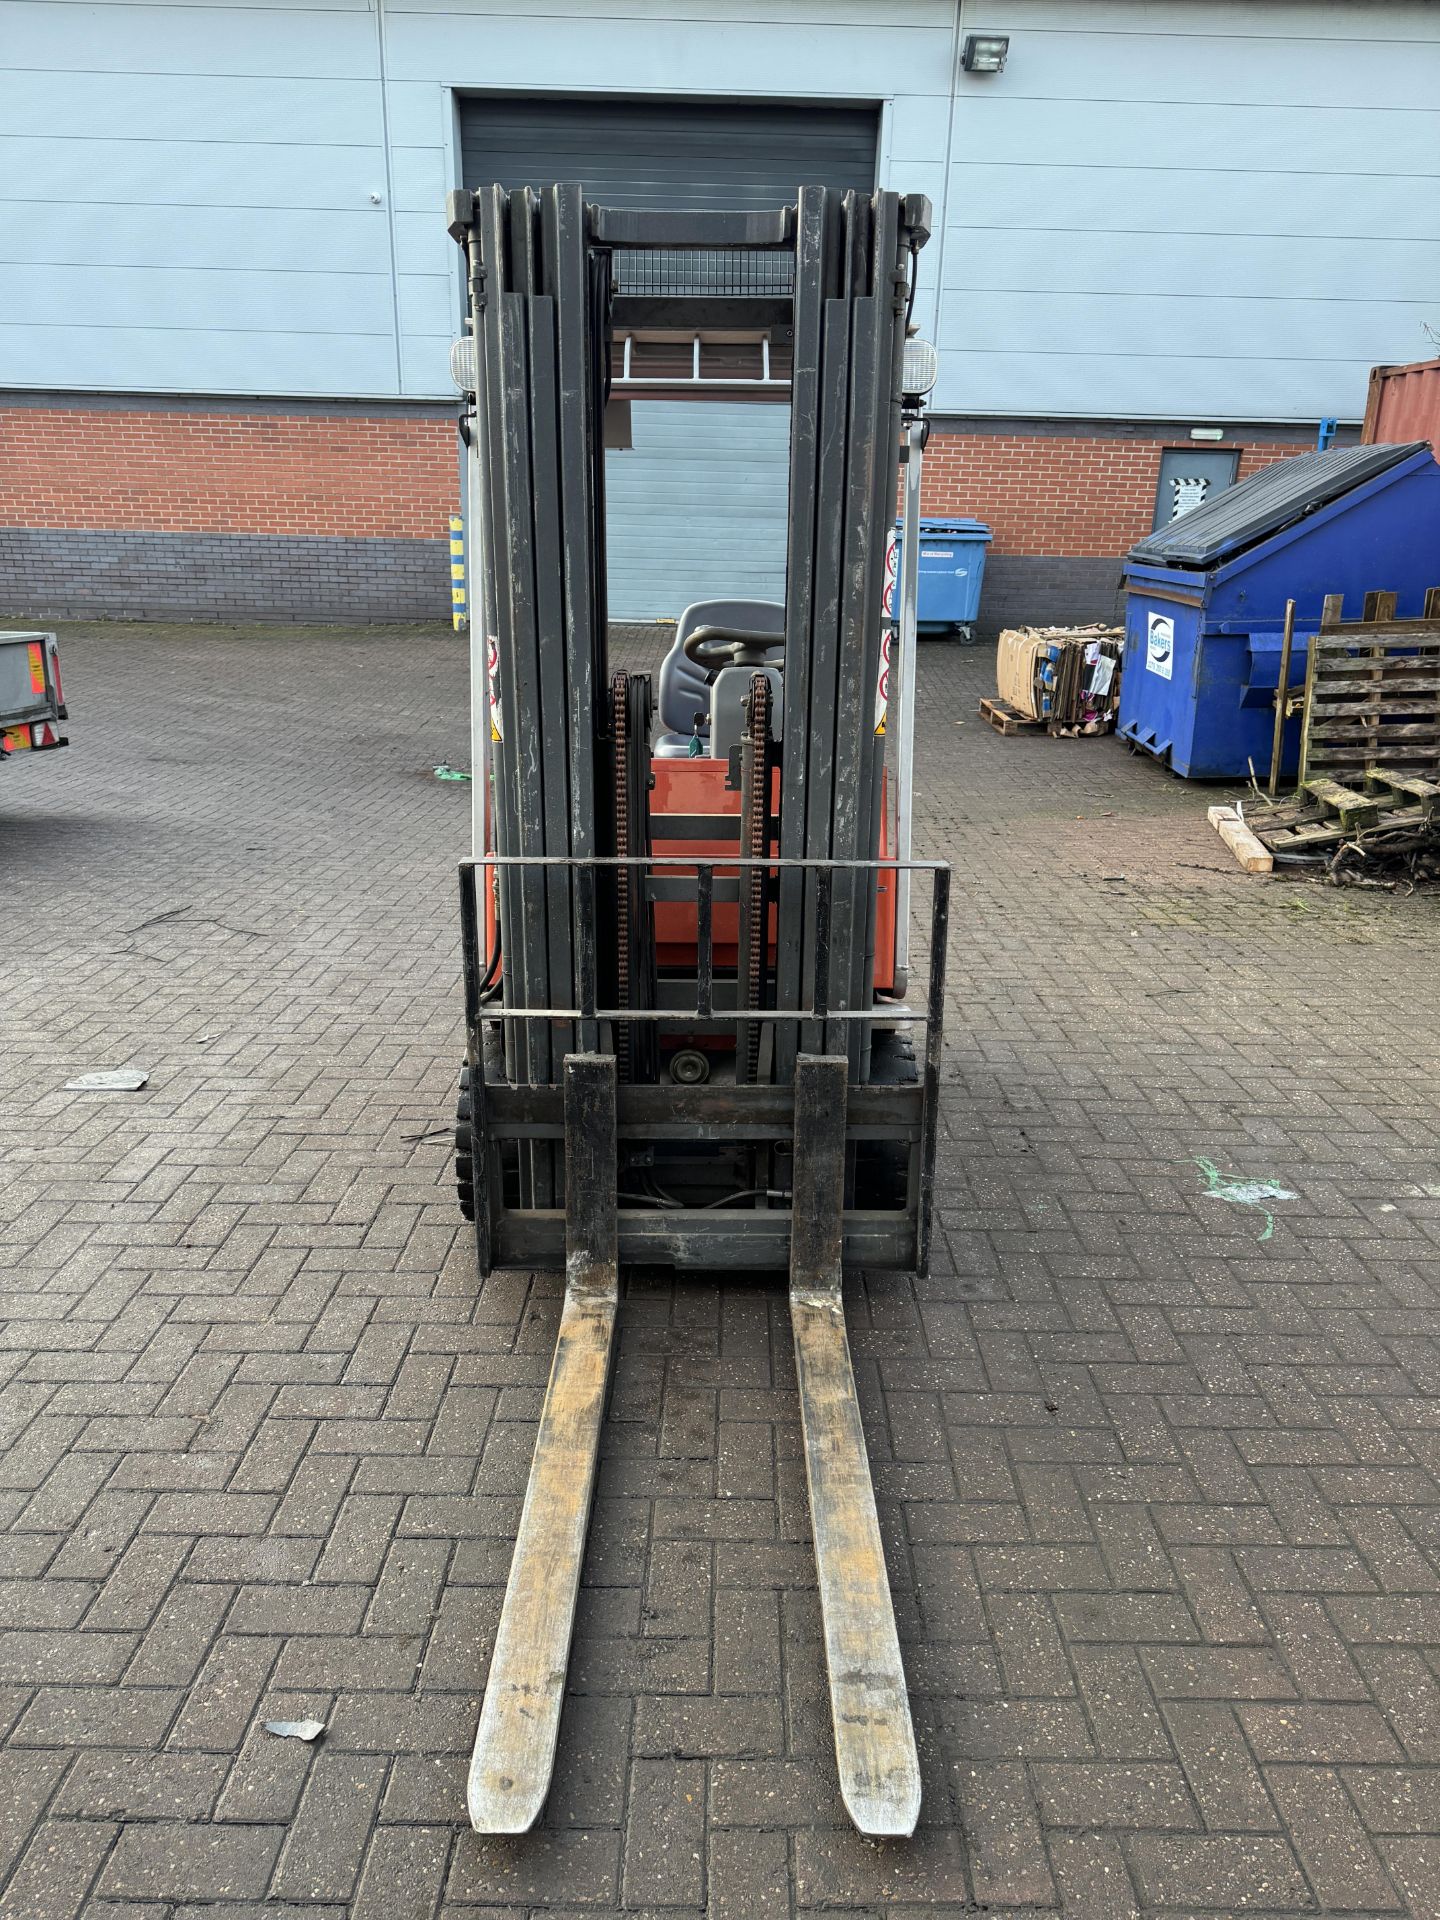 Cargo Model C 3 E 150 Tri Wheel Container Specification Electric Reach Truck - Image 8 of 28